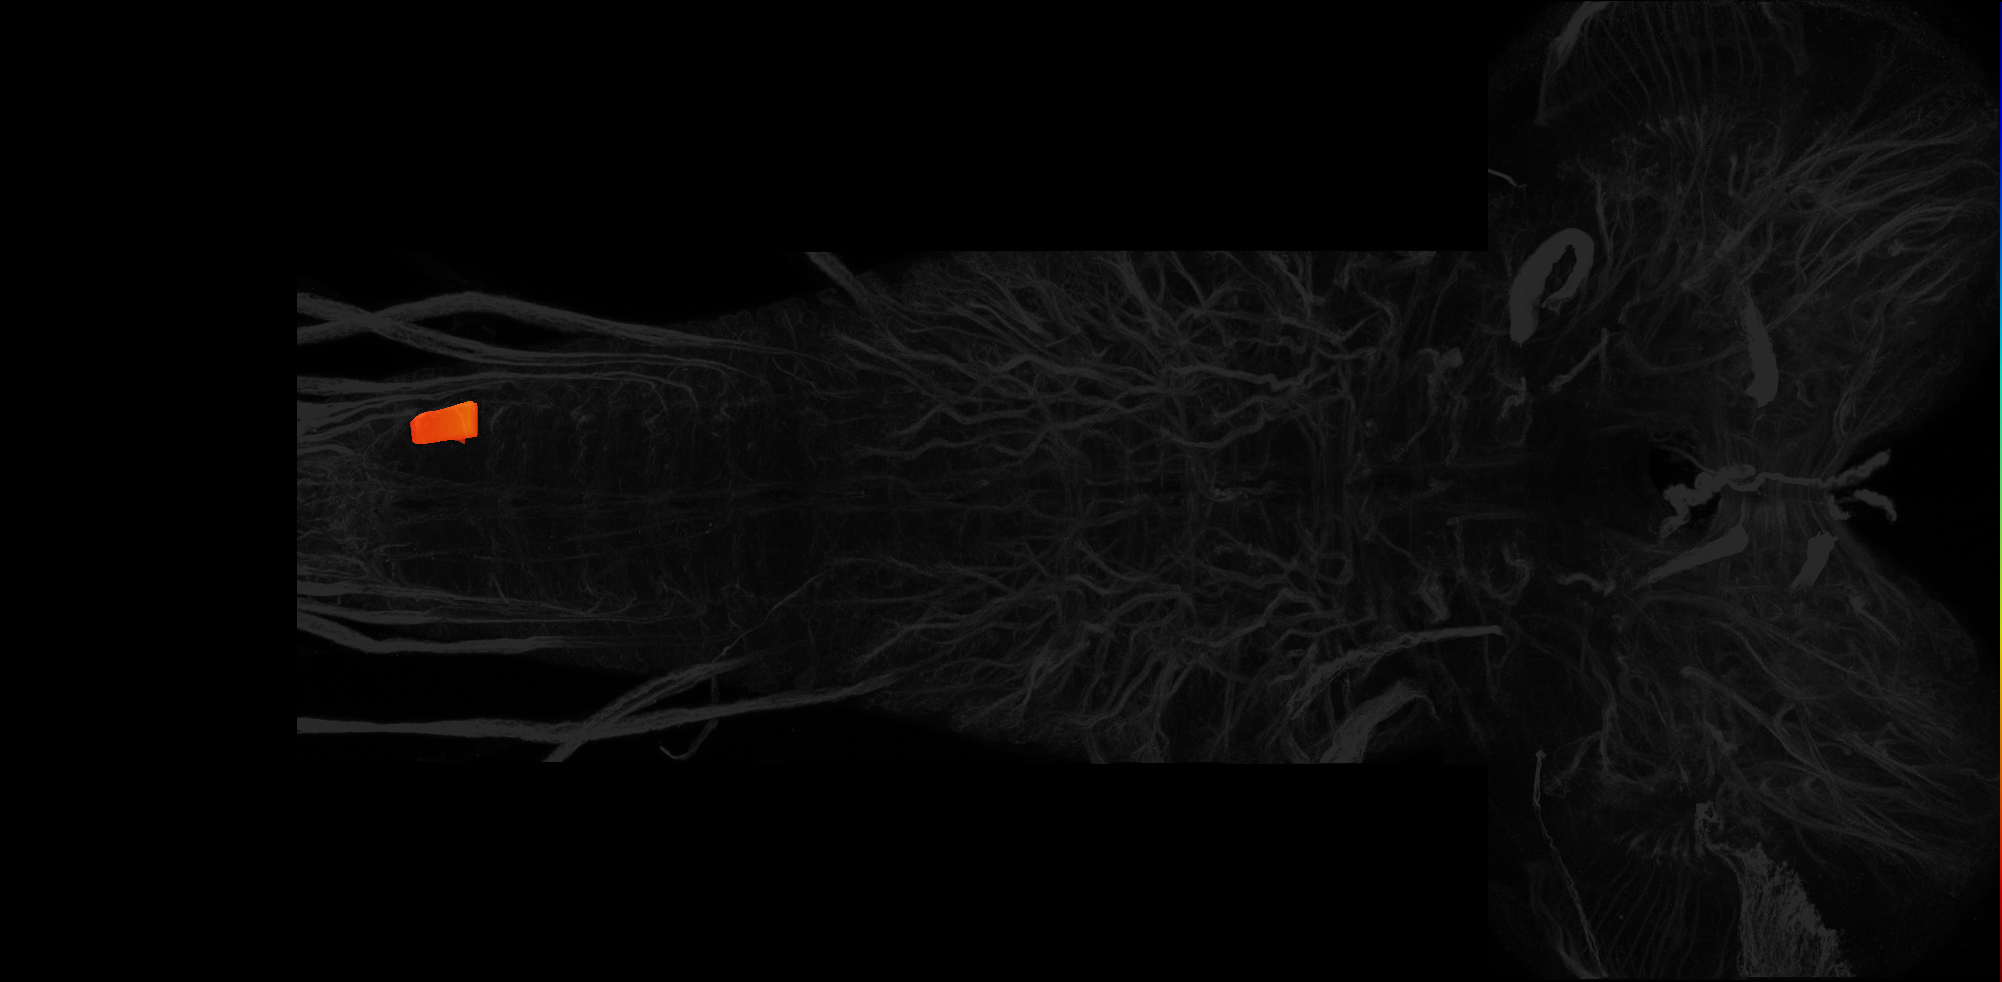 left centrolateral neuropil of A8 on L3 CNS template, Wood2018